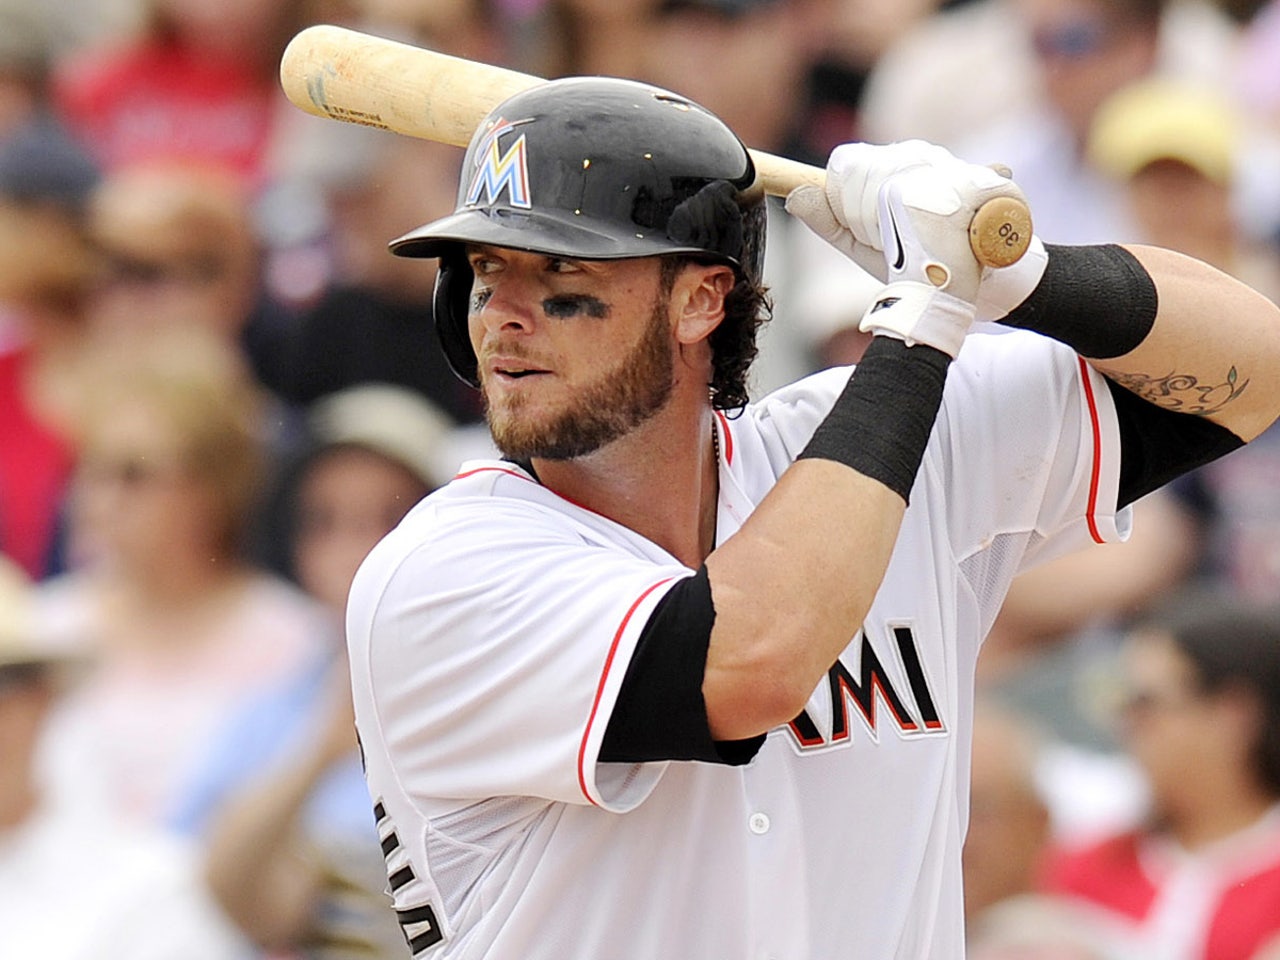 Jarrod Saltalamacchia determined to build new memories with Marlins